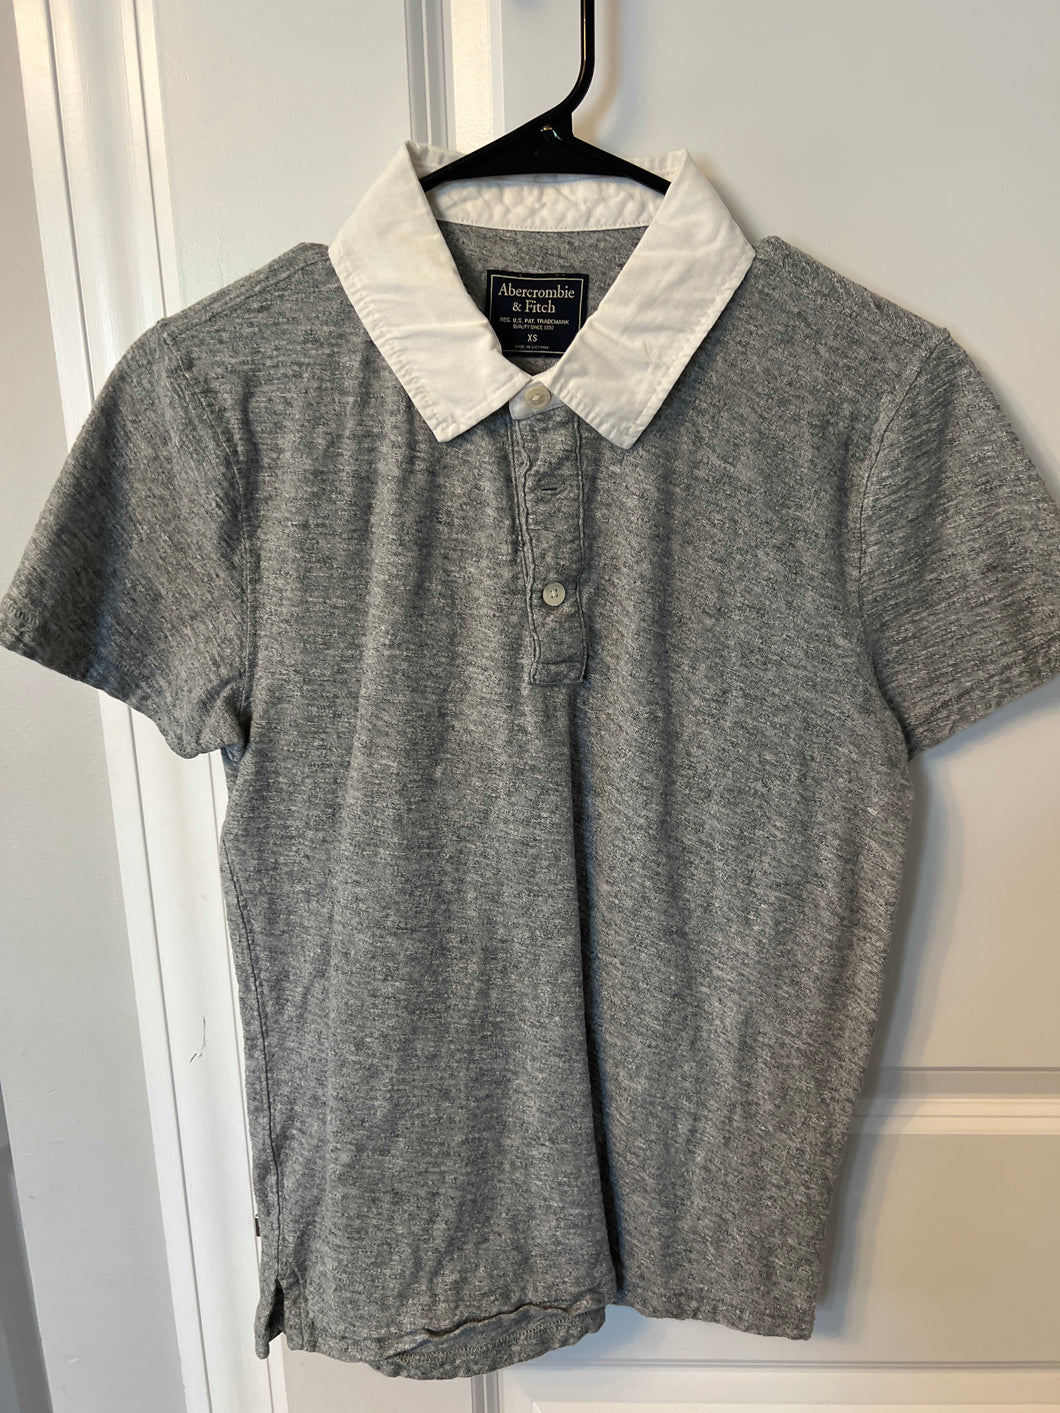 Abercrombie & Fitch polo XS